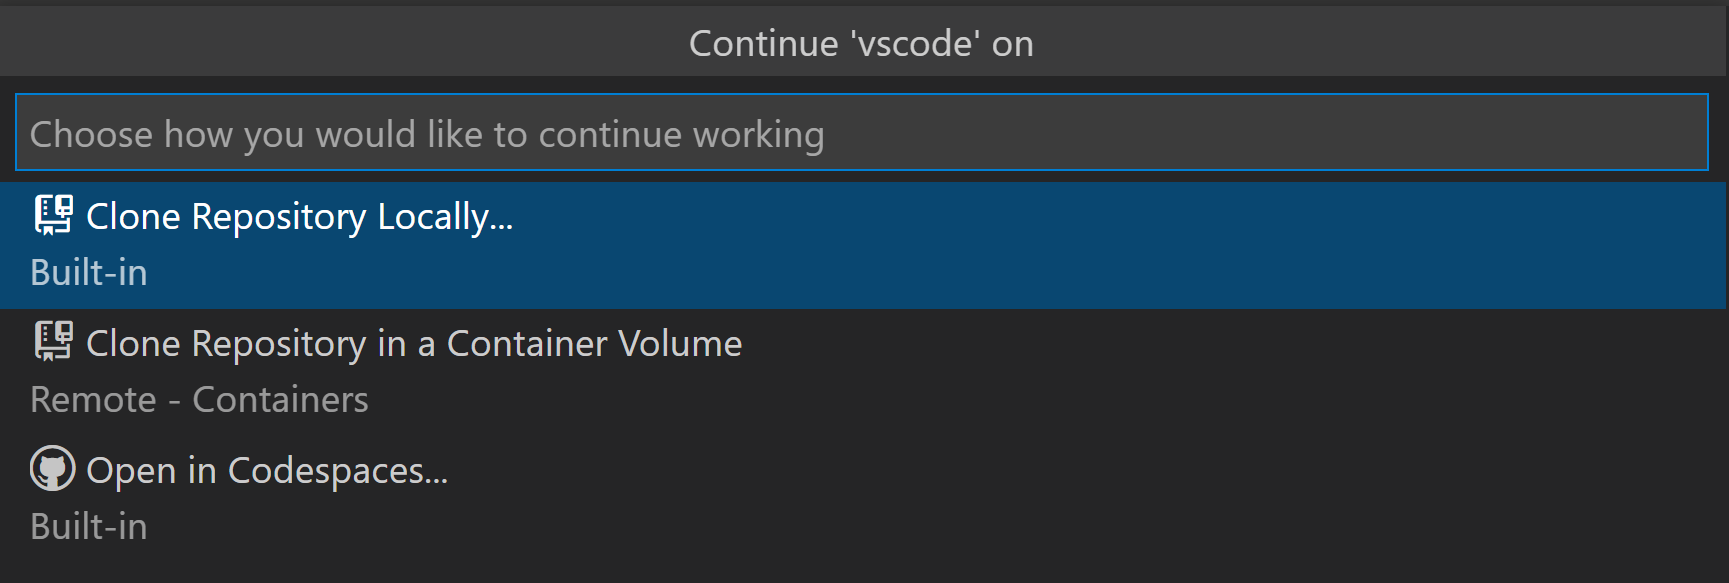 VS Code Command Palette with options to continue locally, in a volume, or in Codespaces